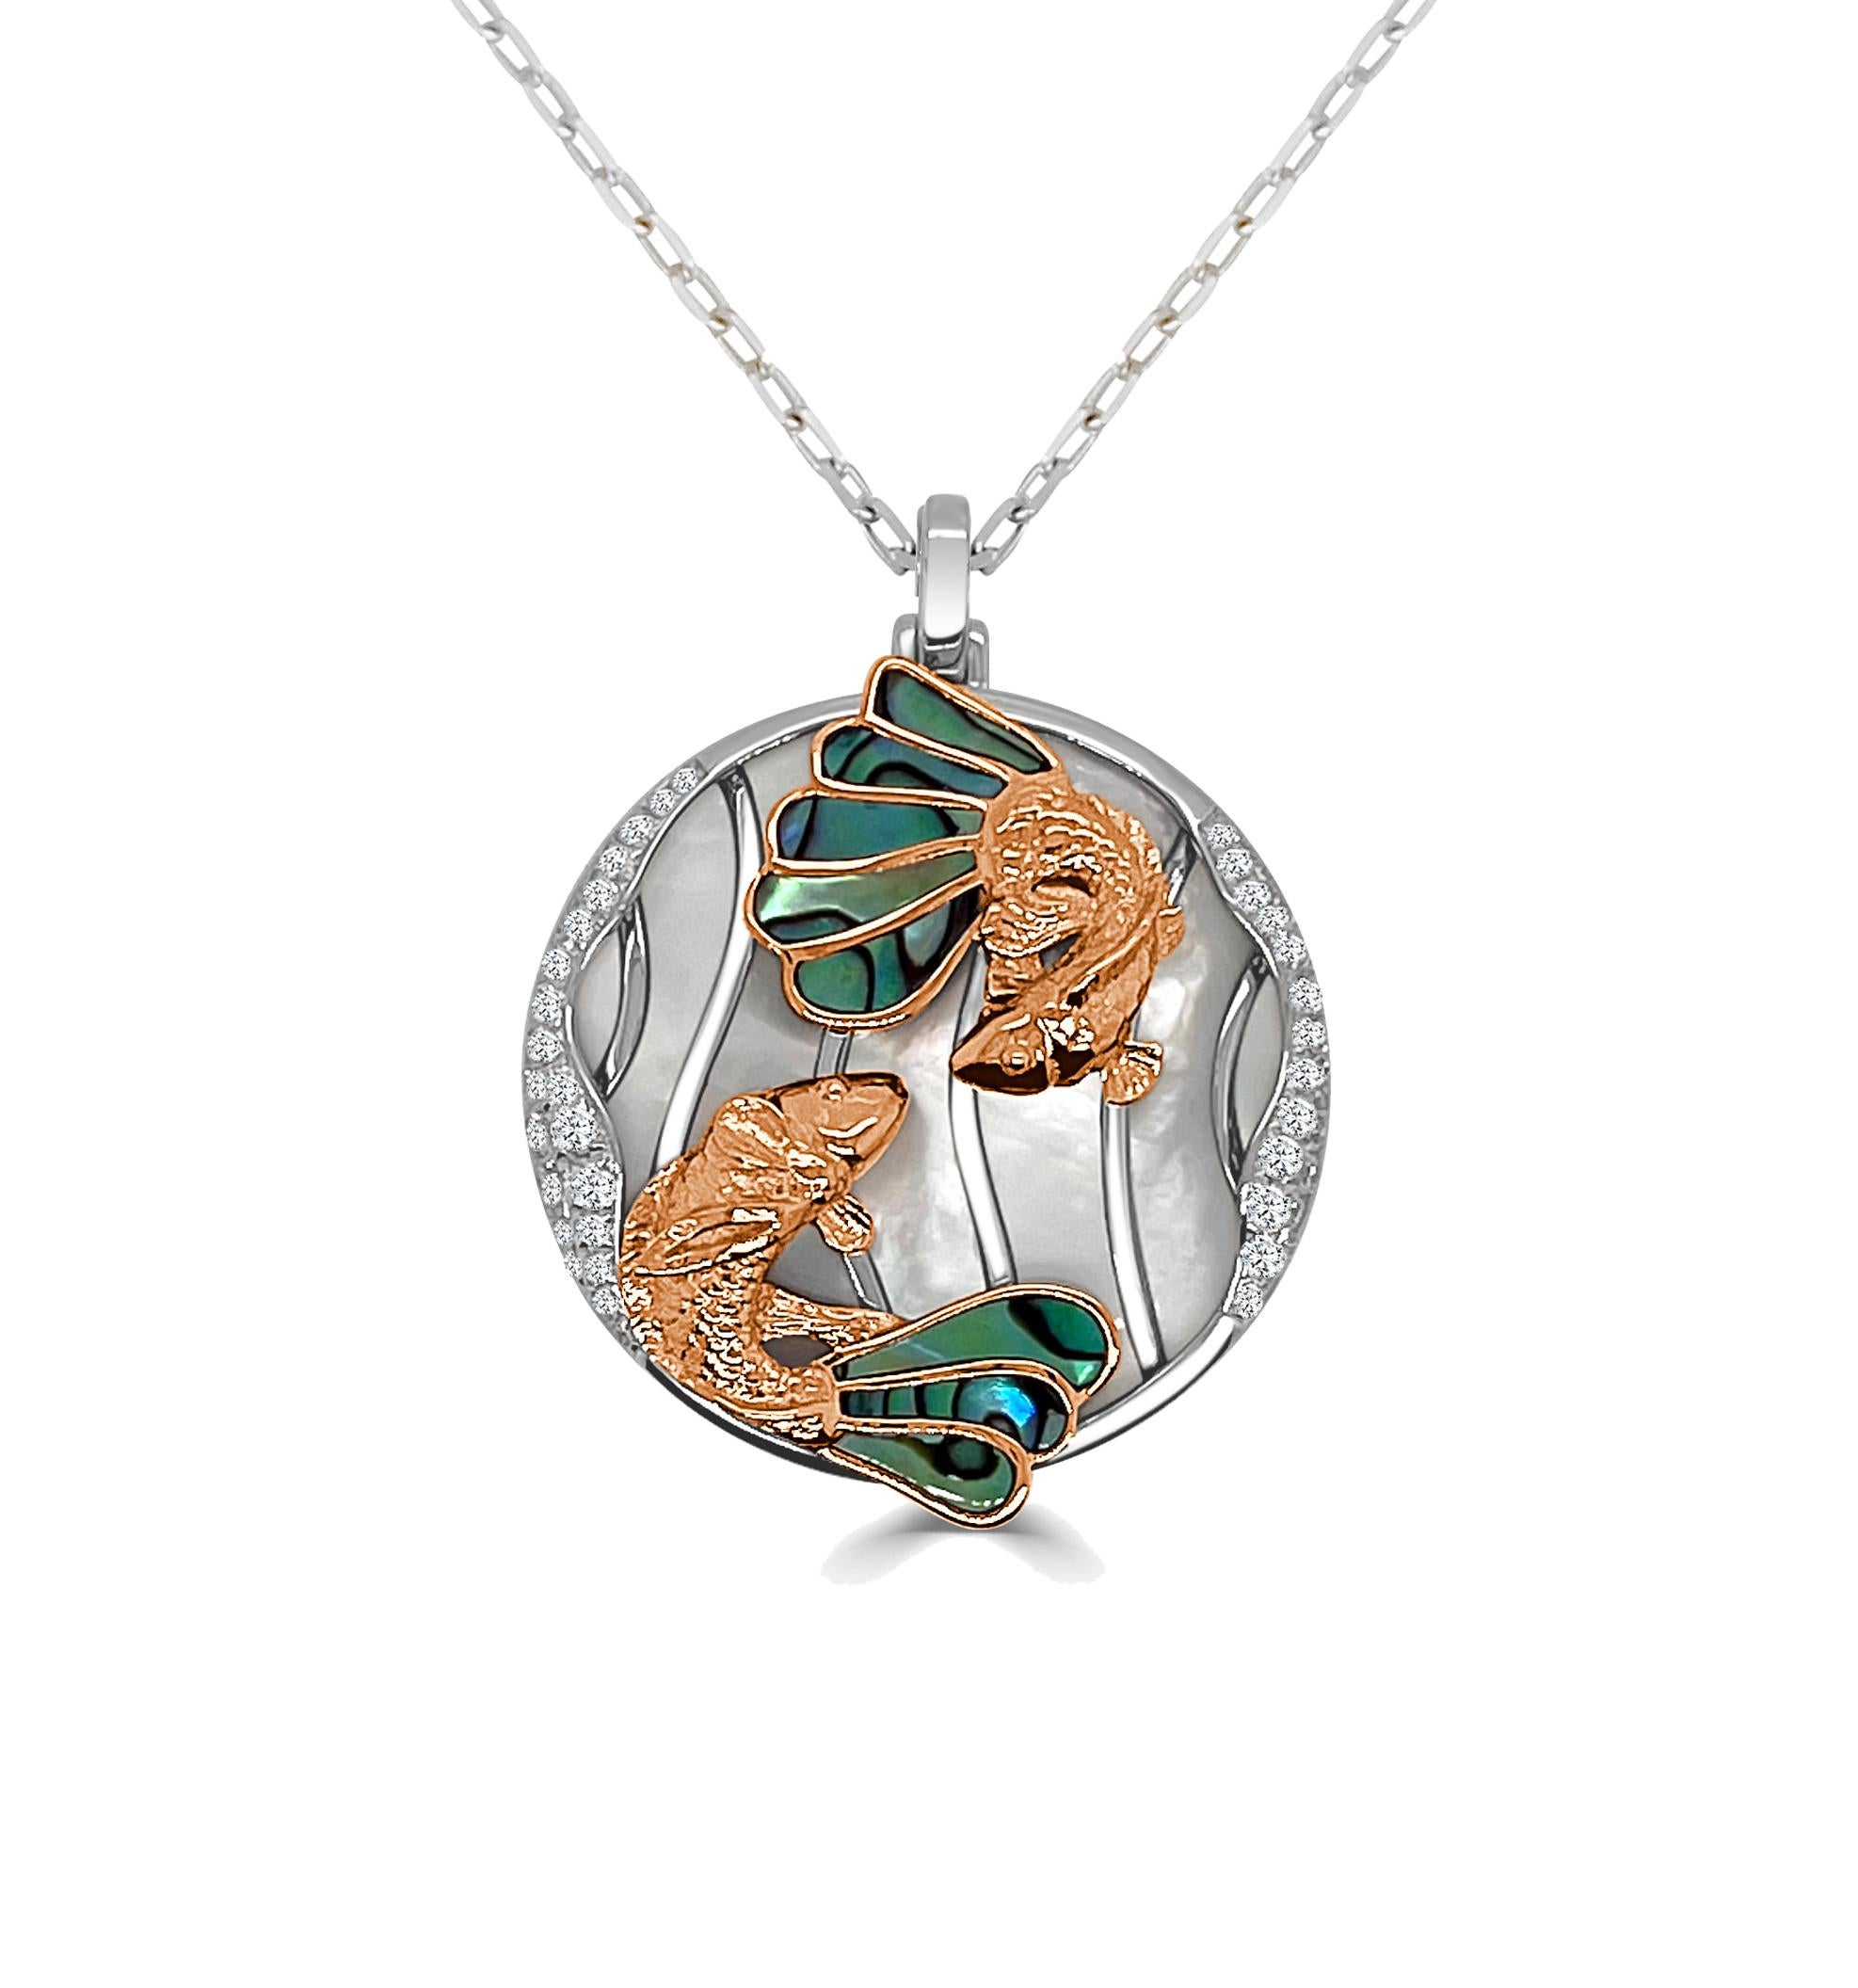 Medium Koi Pendant With Abalone And White Mother Of Pearl Pendant On Polish Bale With Mini Paper Clip Chain, 0.26 Ct, (approximately 24 mm diameter / 31mm including bale)

Available in other metal/ gemstone options: This Natural Shell pendant can be